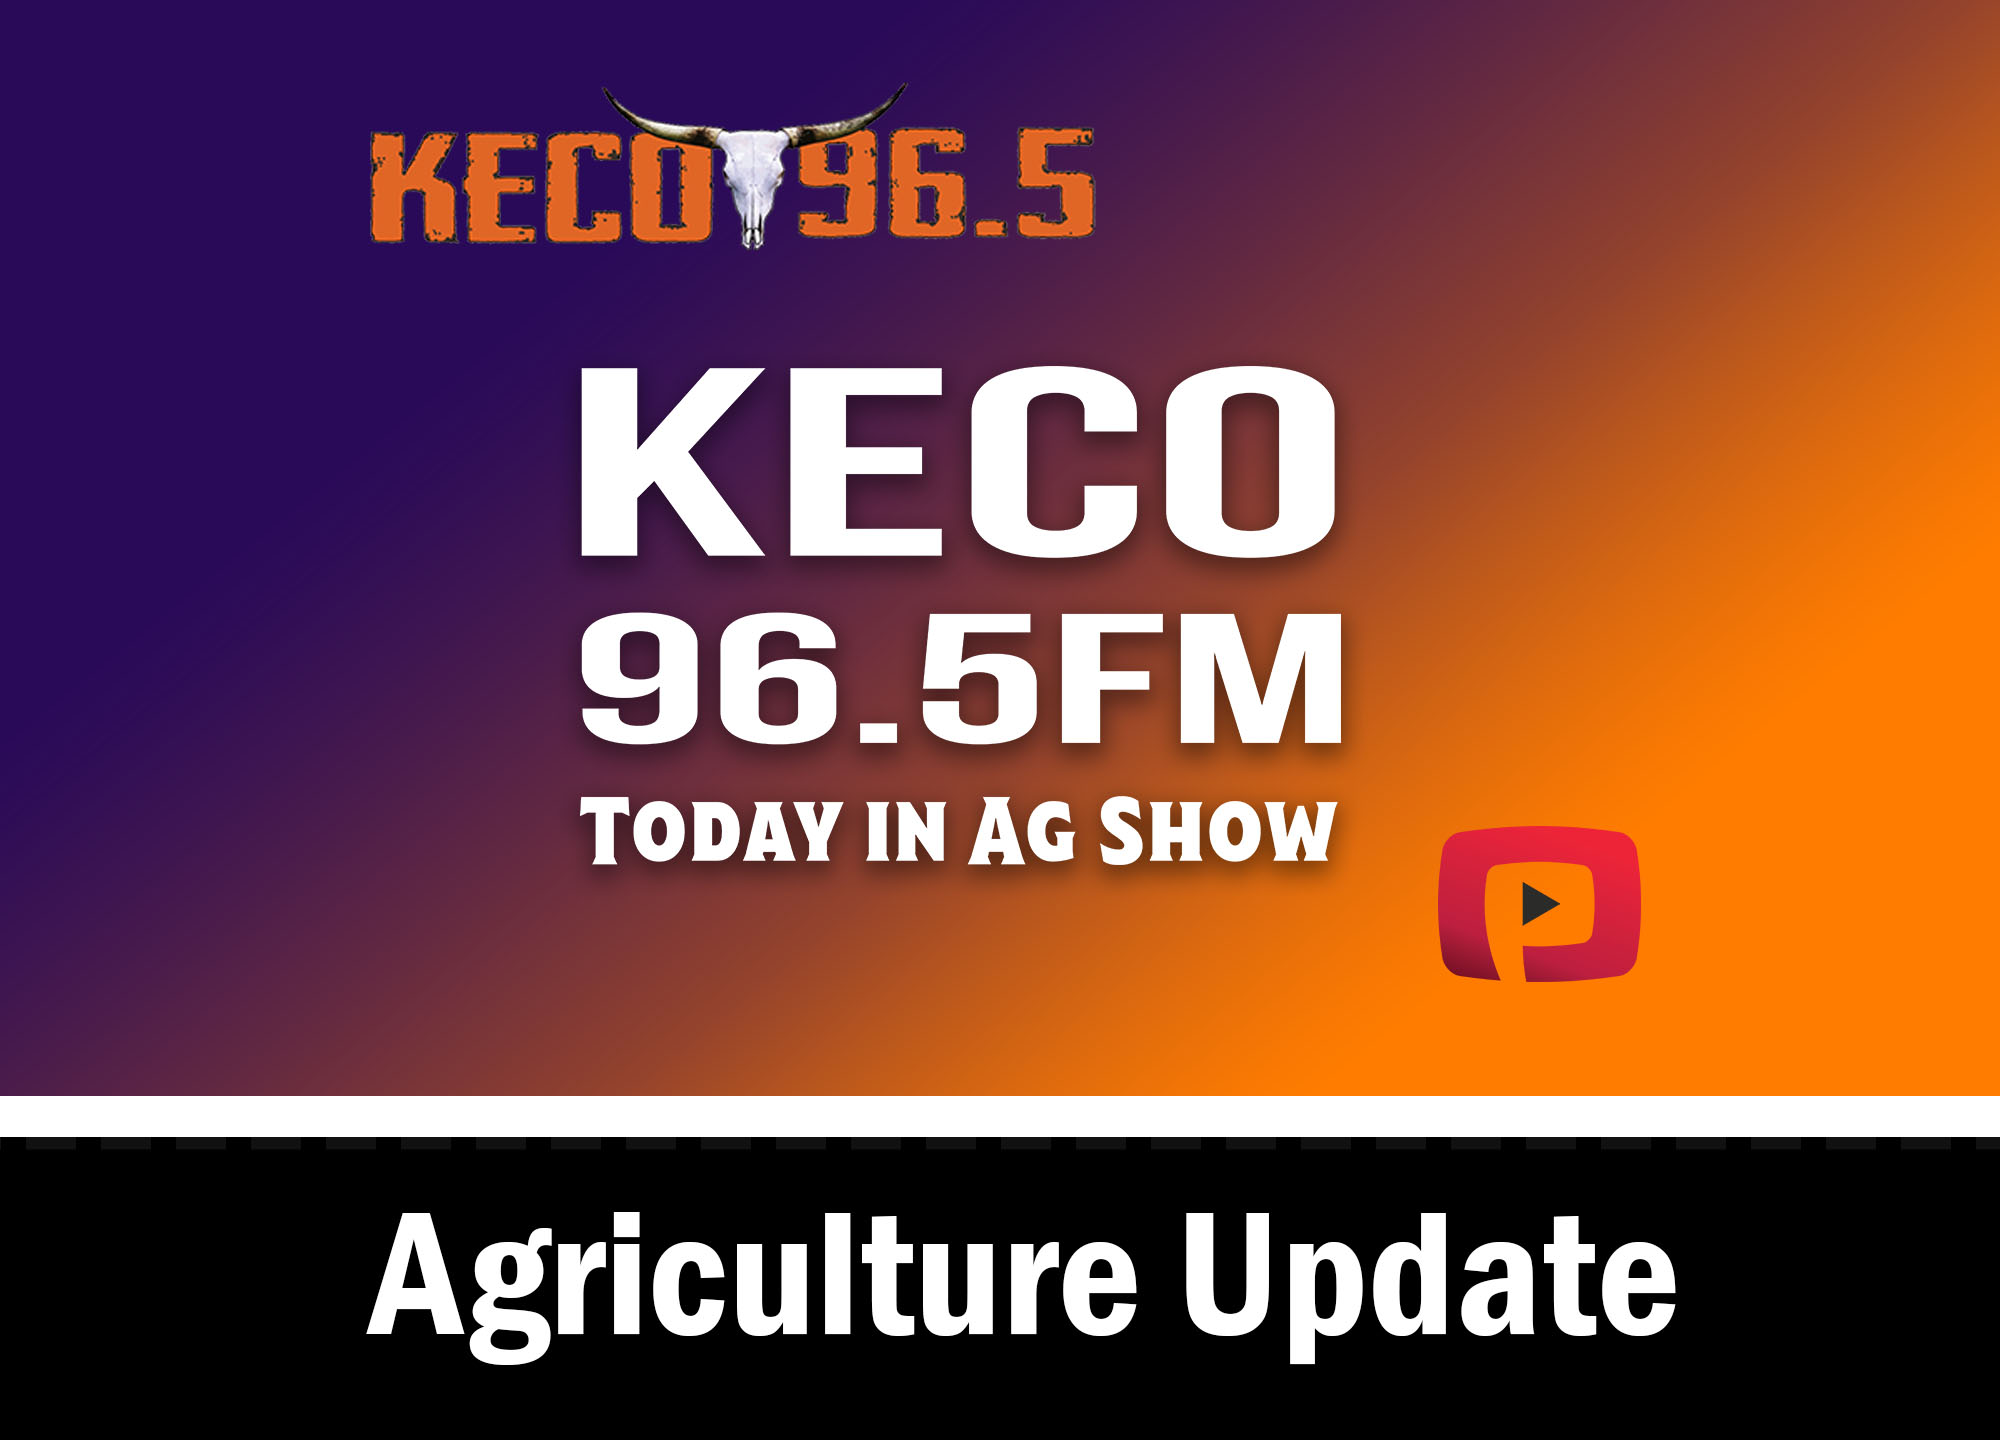 KECO agriculture update